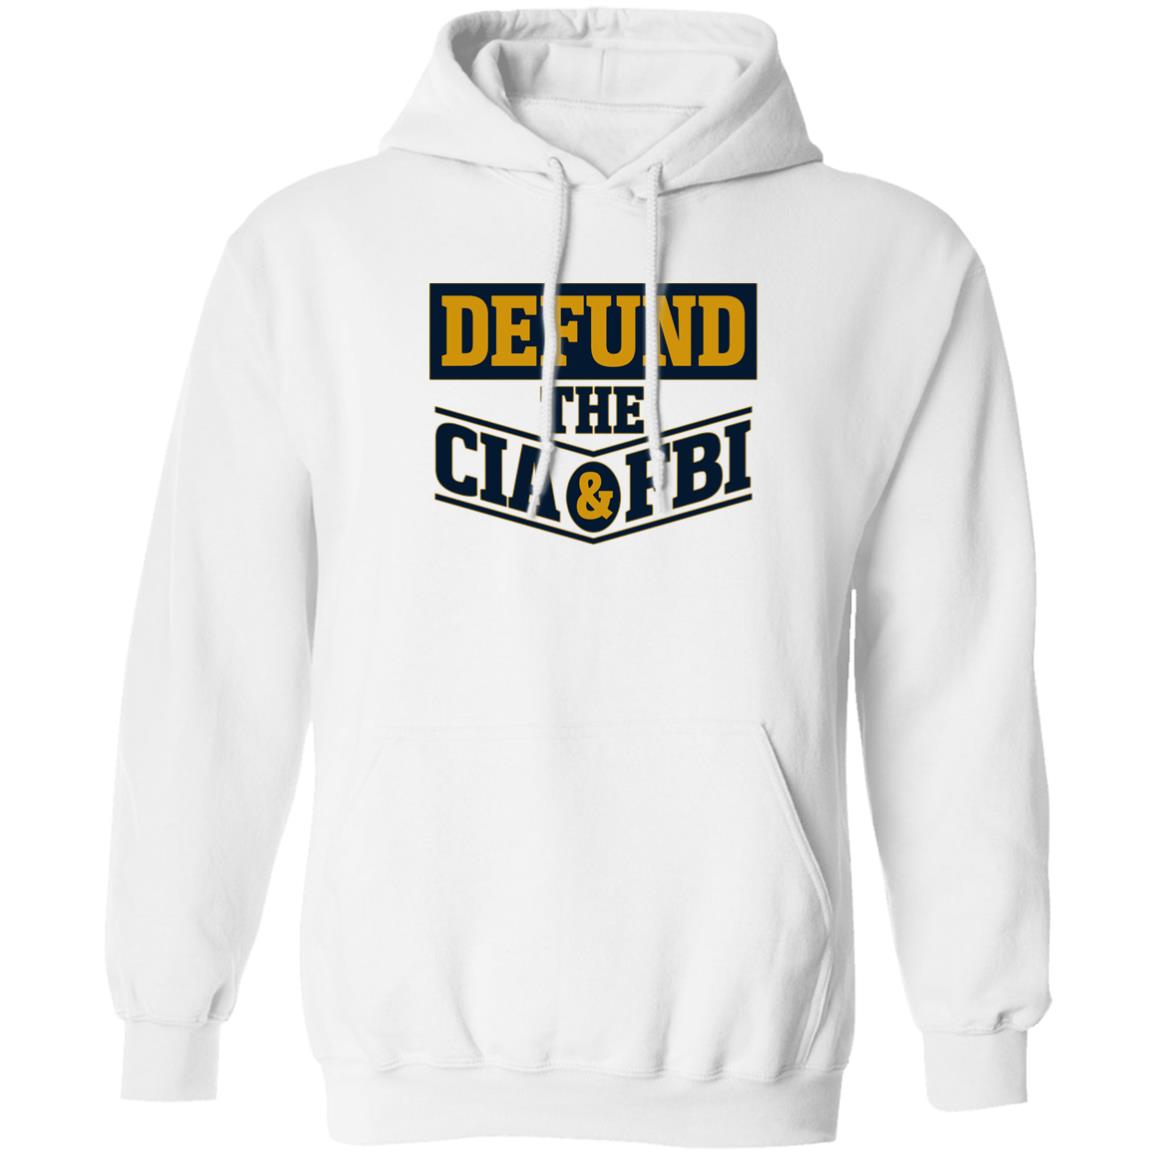 Defund The Cia And Fbi Shirt 2